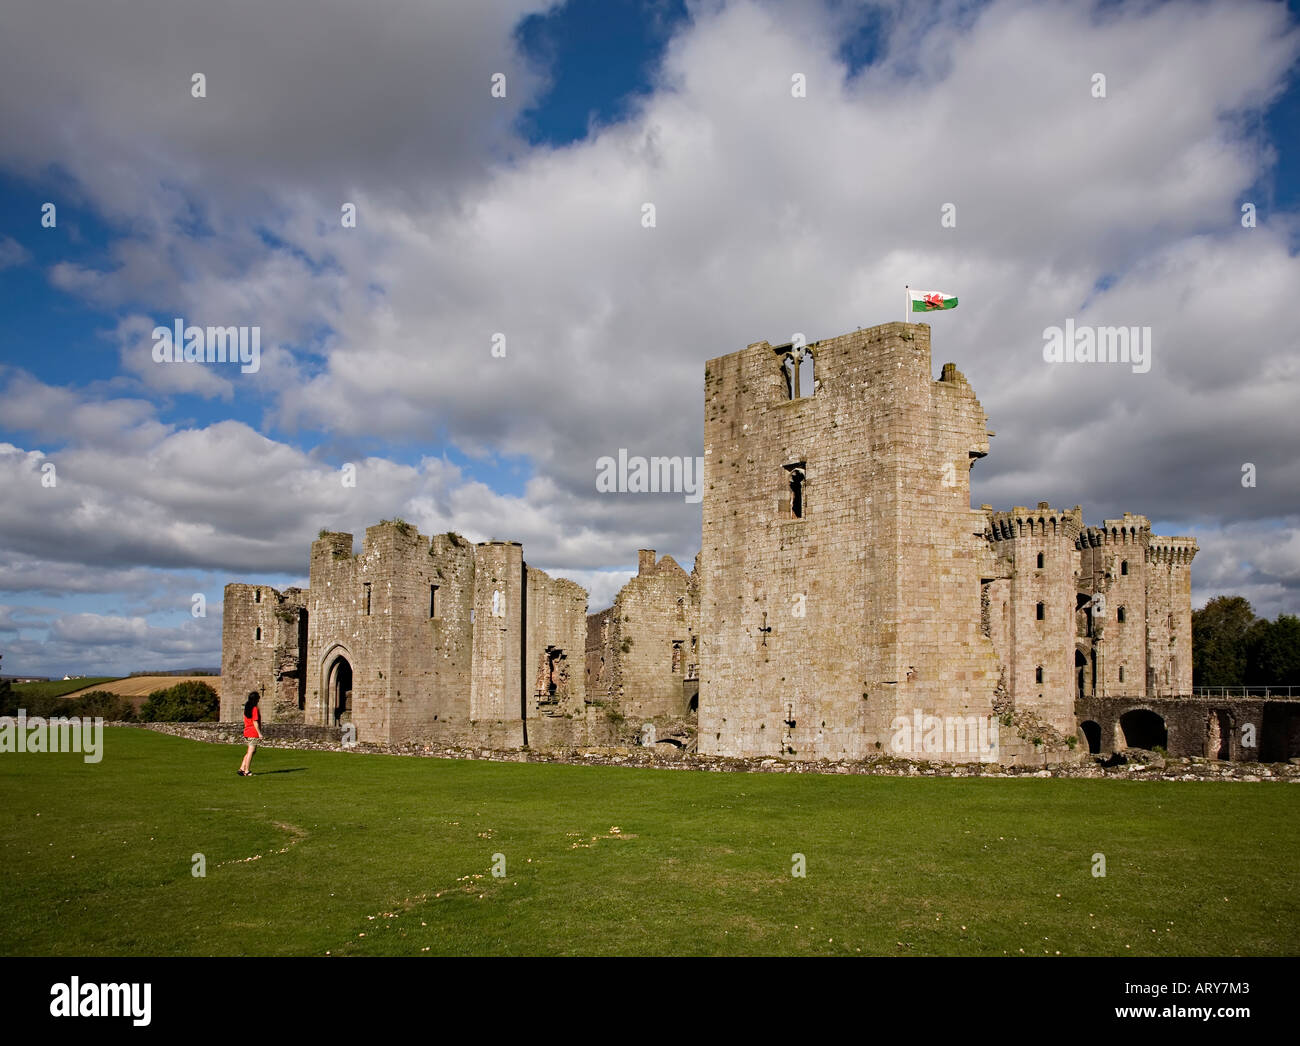 Woman looking at Raglan Castle from the south bowling lawn Raglan Castle Monmouthshire Wales UK Stock Photo